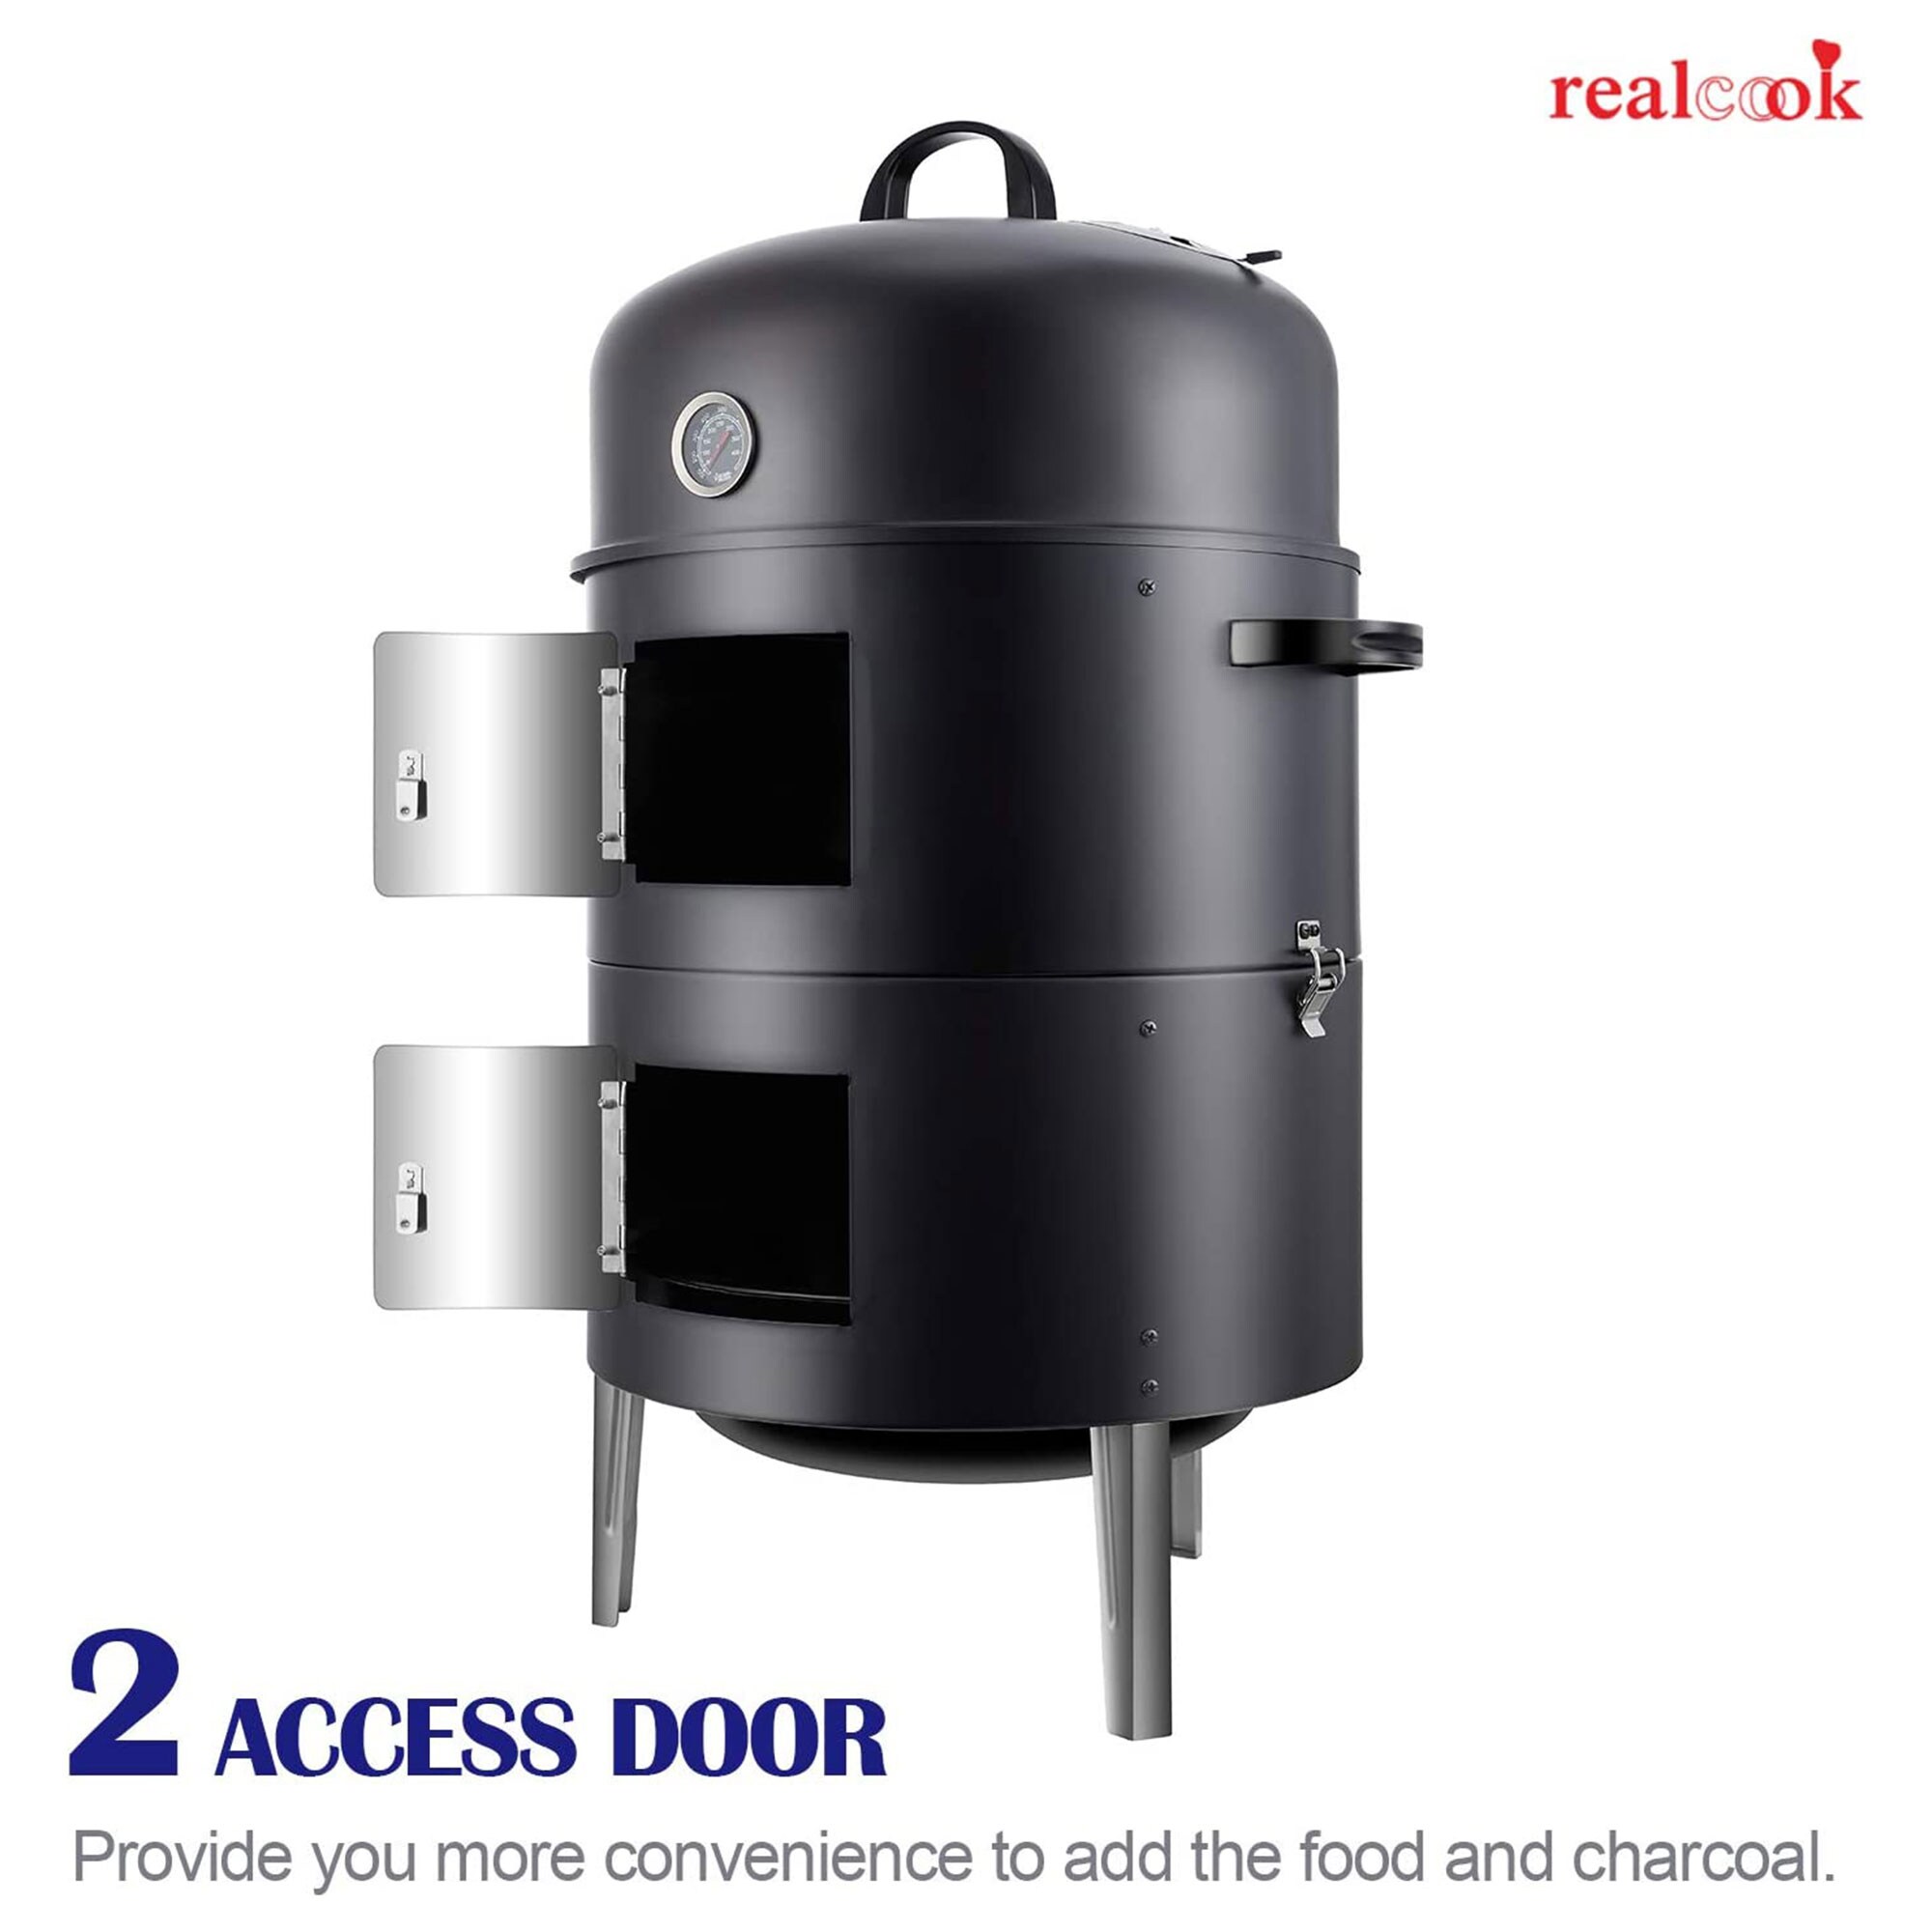 Realcook Grills & Outdoor Cooking at